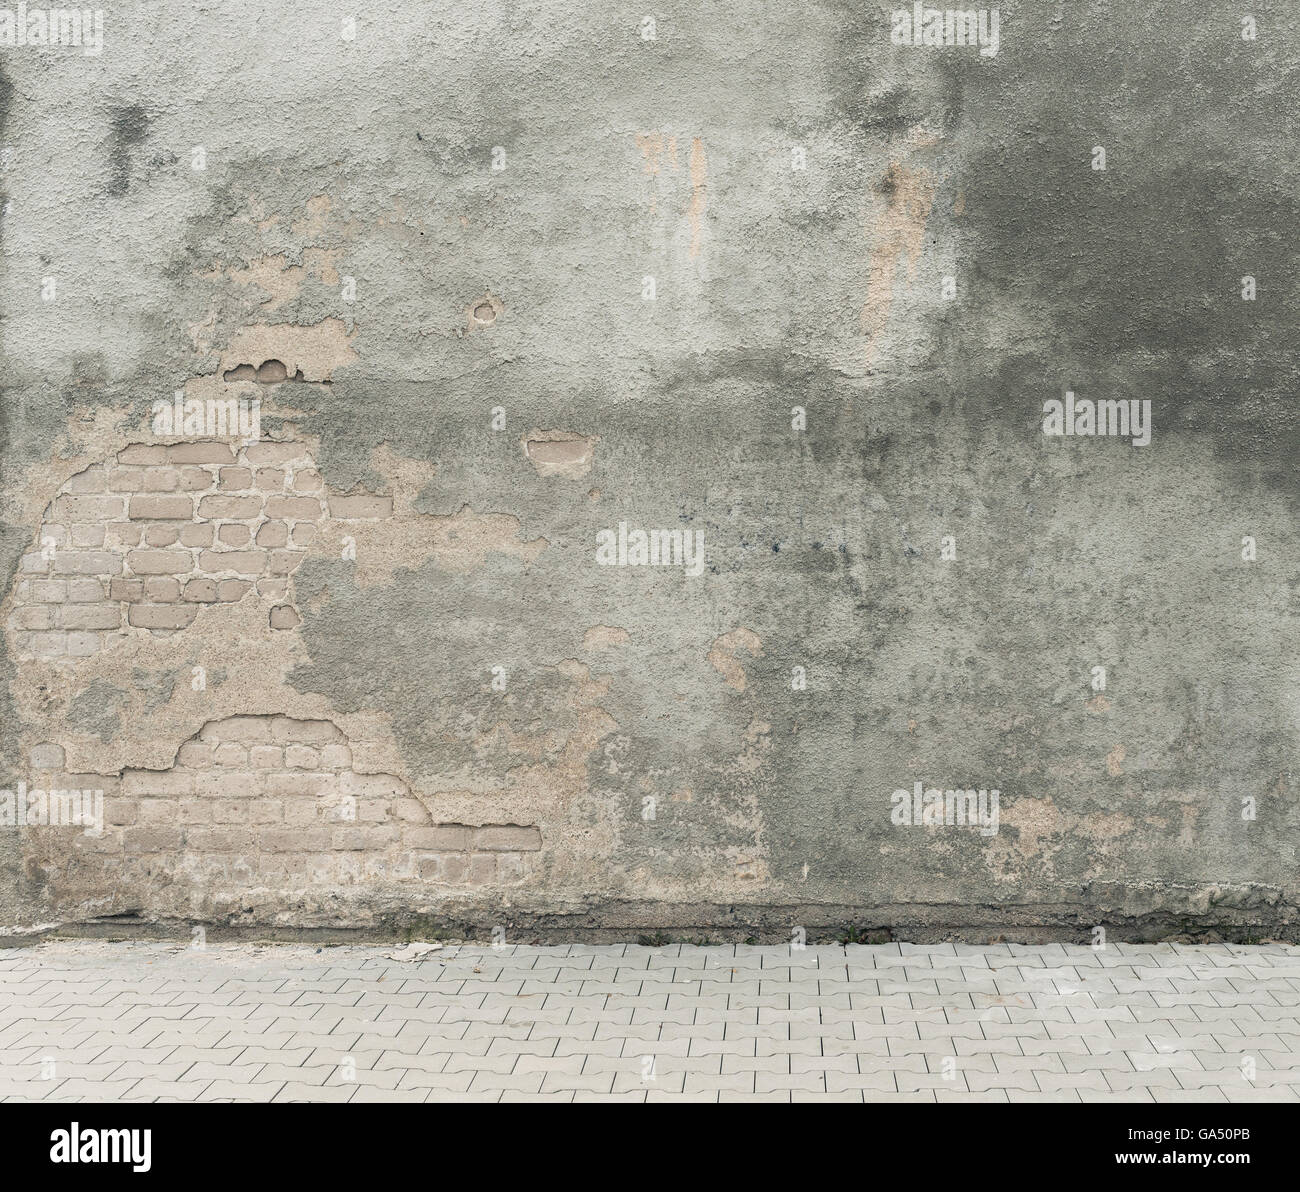 Urban background. Grunge obsolete street wall and pavement. Stock Photo